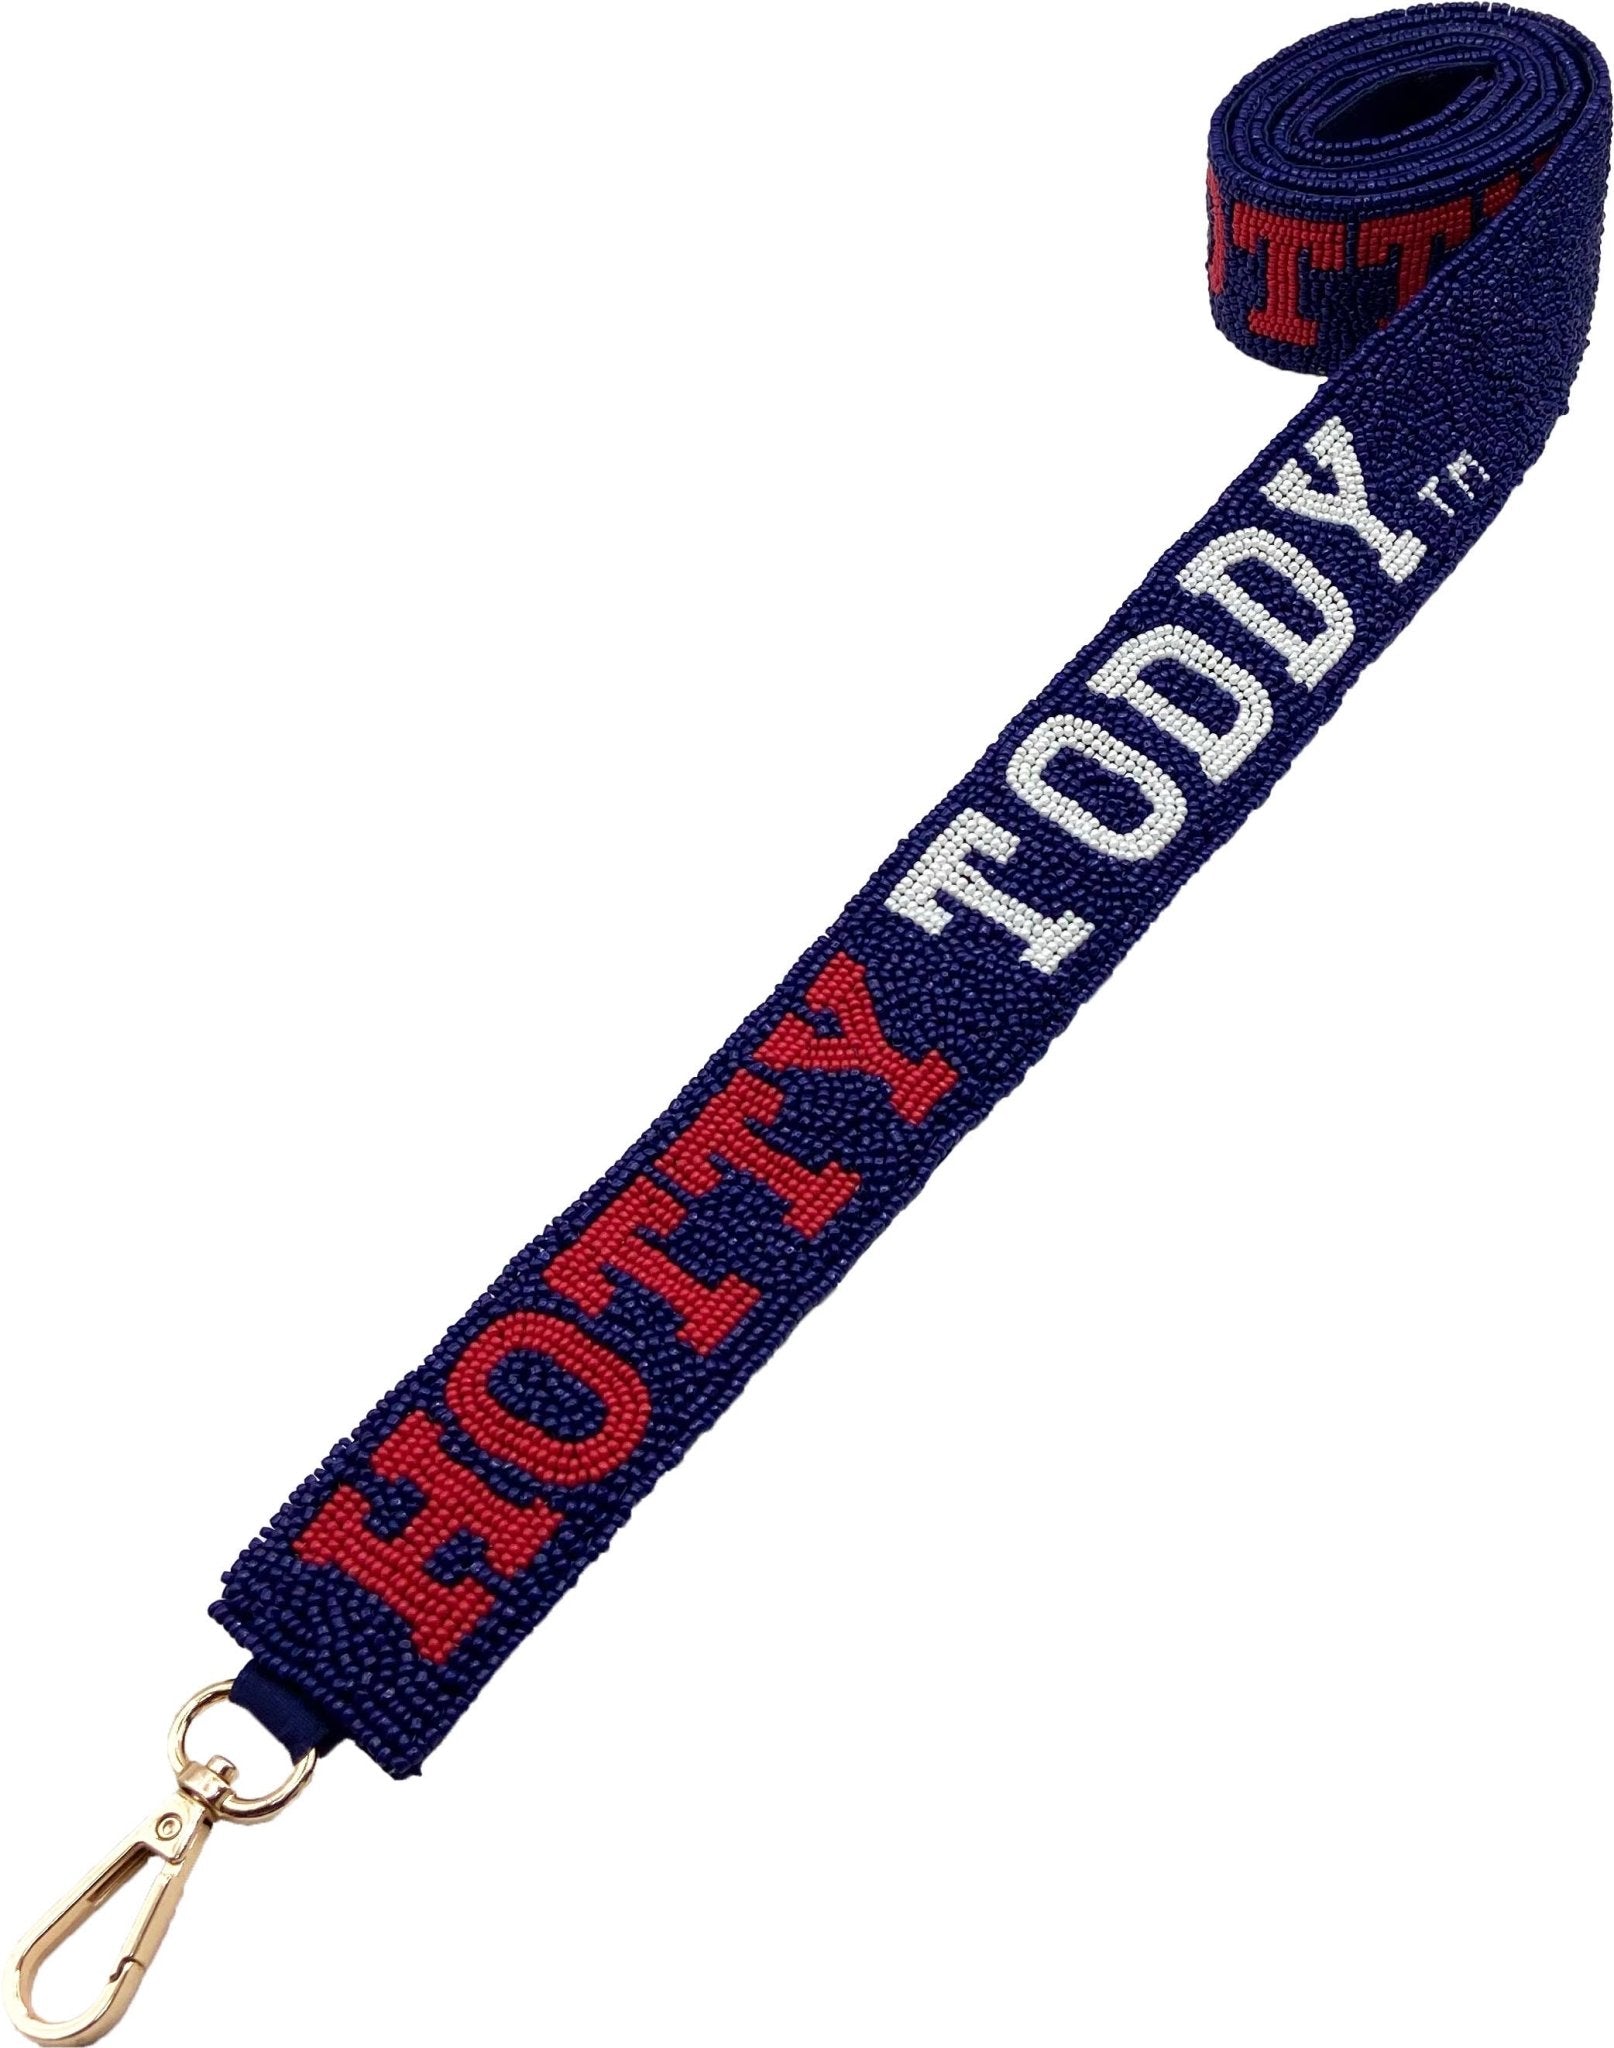 Hotty Toddy Blue + Red Beaded Bag Strap - Pizzazz, Inc. - Color Game